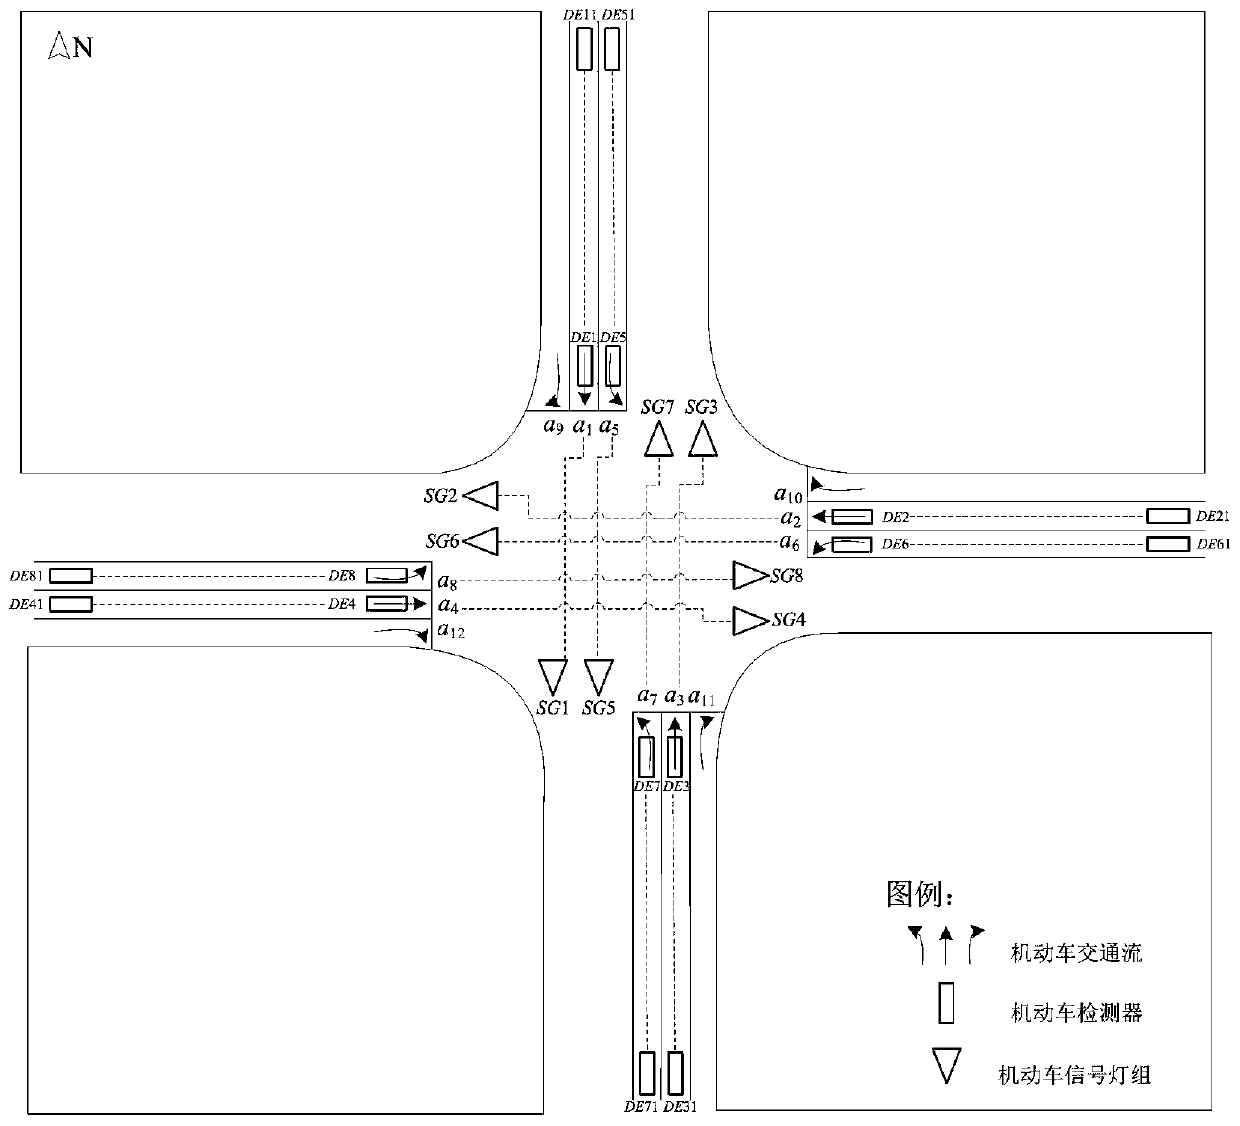 Dynamic intersection motor vehicle traffic signal allocation method